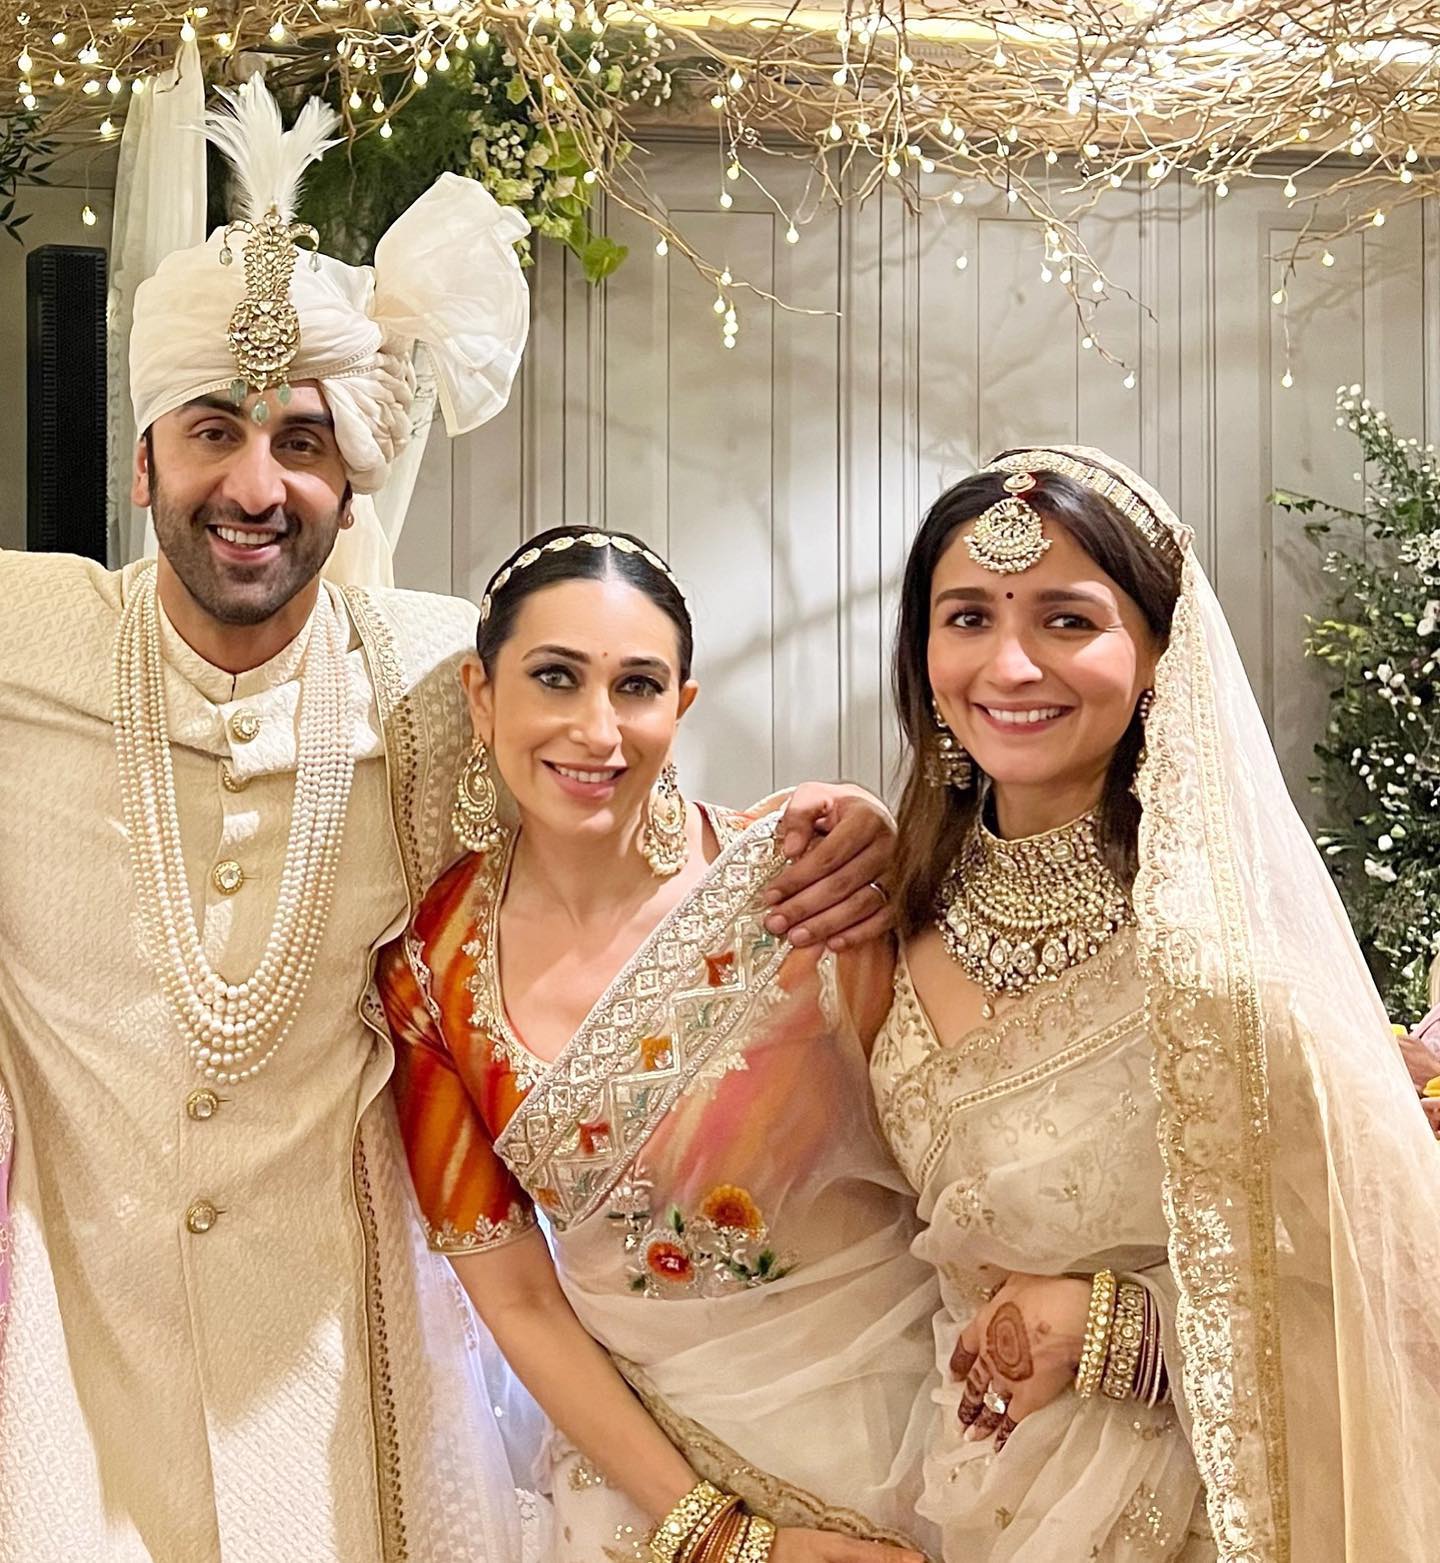 Ranbir-Alia Wedding: Here Are Some Inside Pictures From The Couple’s Dreamy Wedding